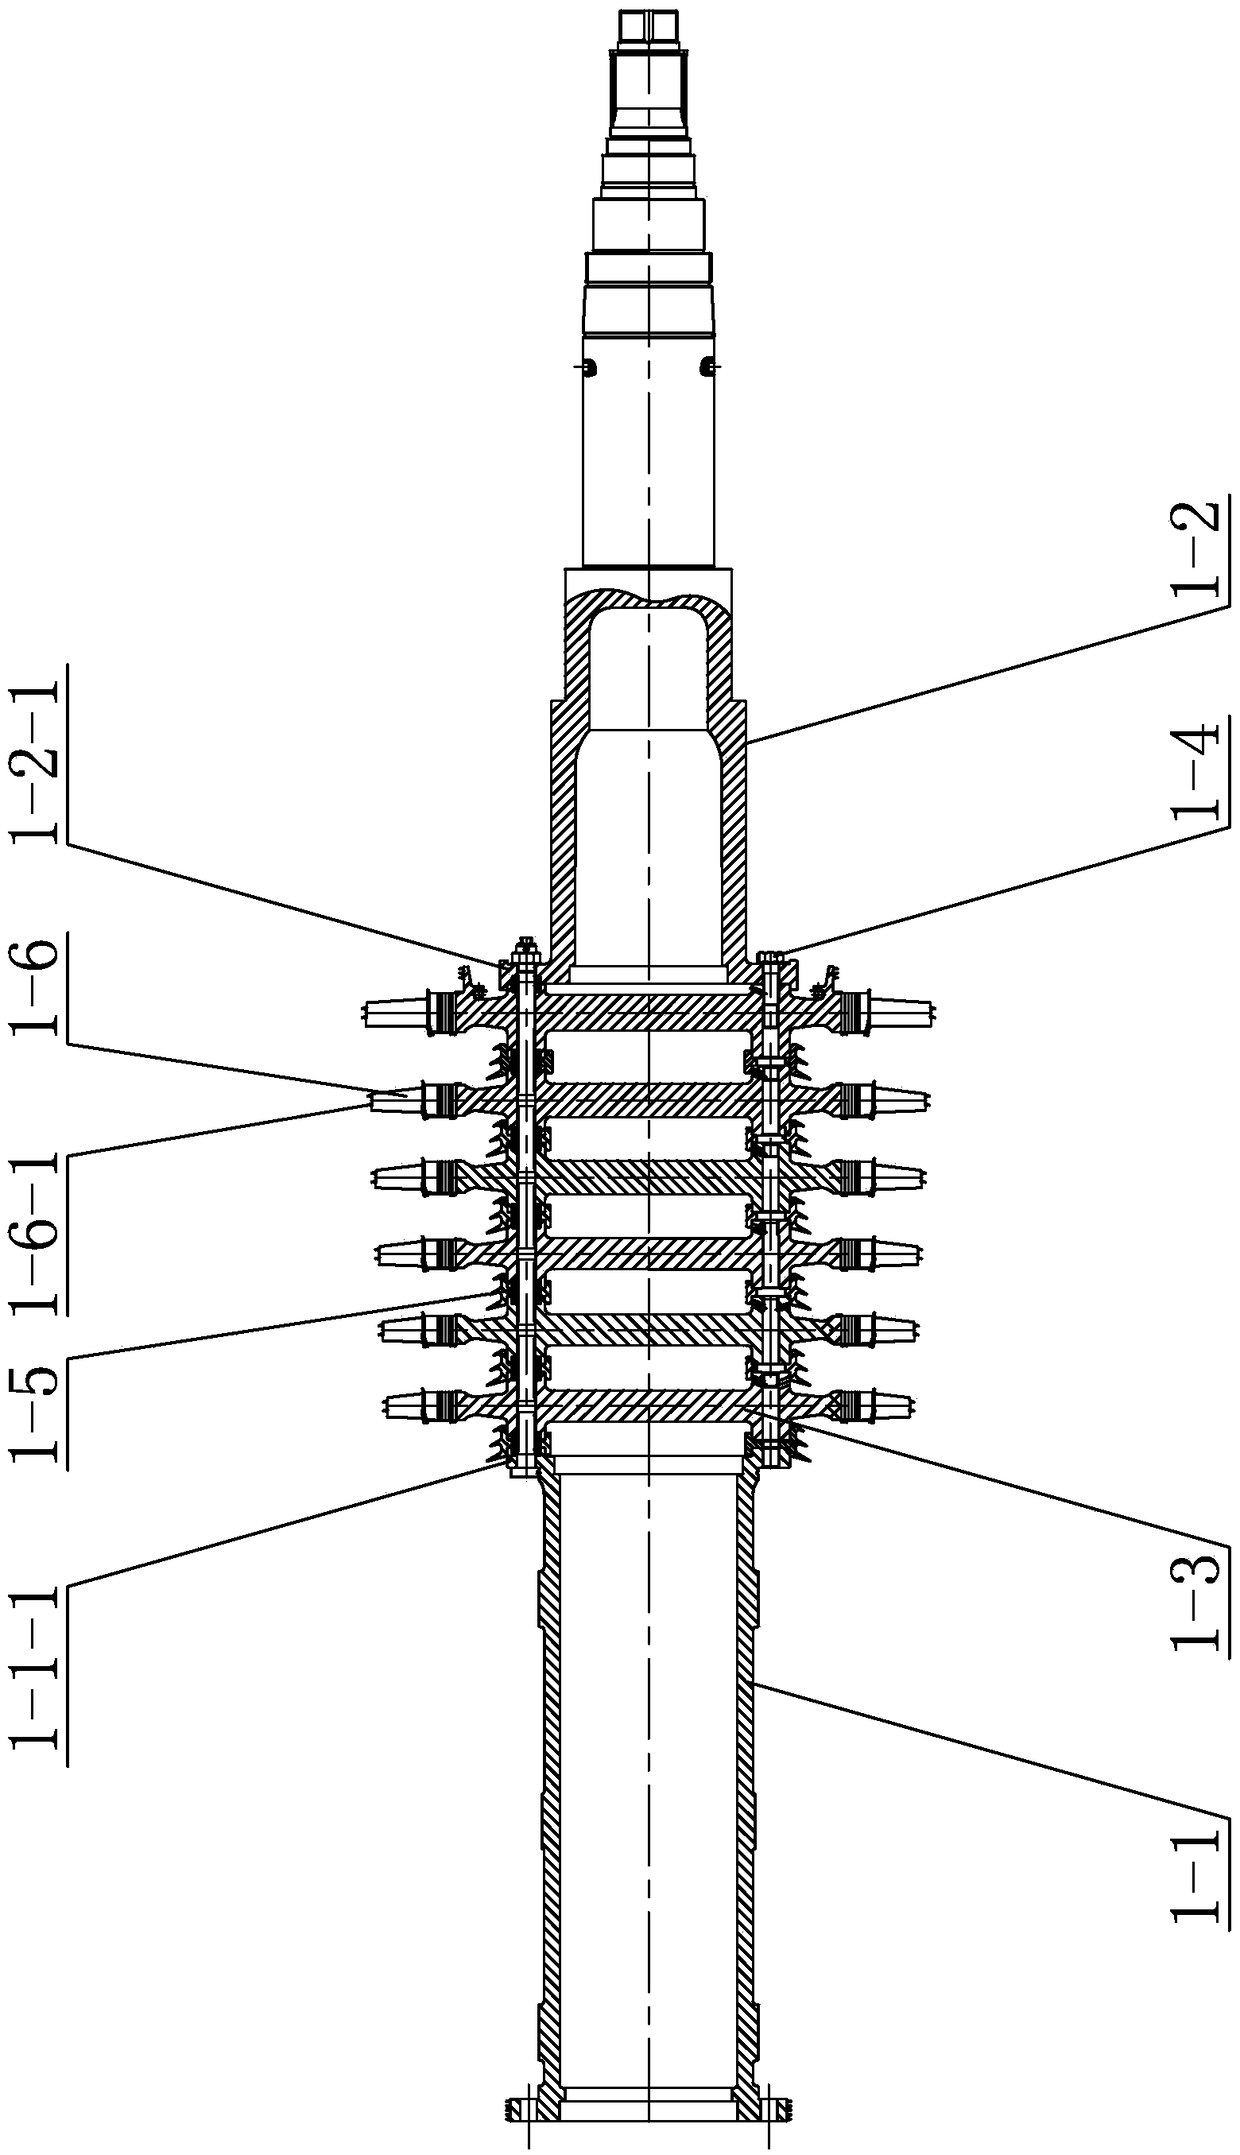 Connection structure capable of realizing rapid disassembly and assembly, and used for helium gas turbine